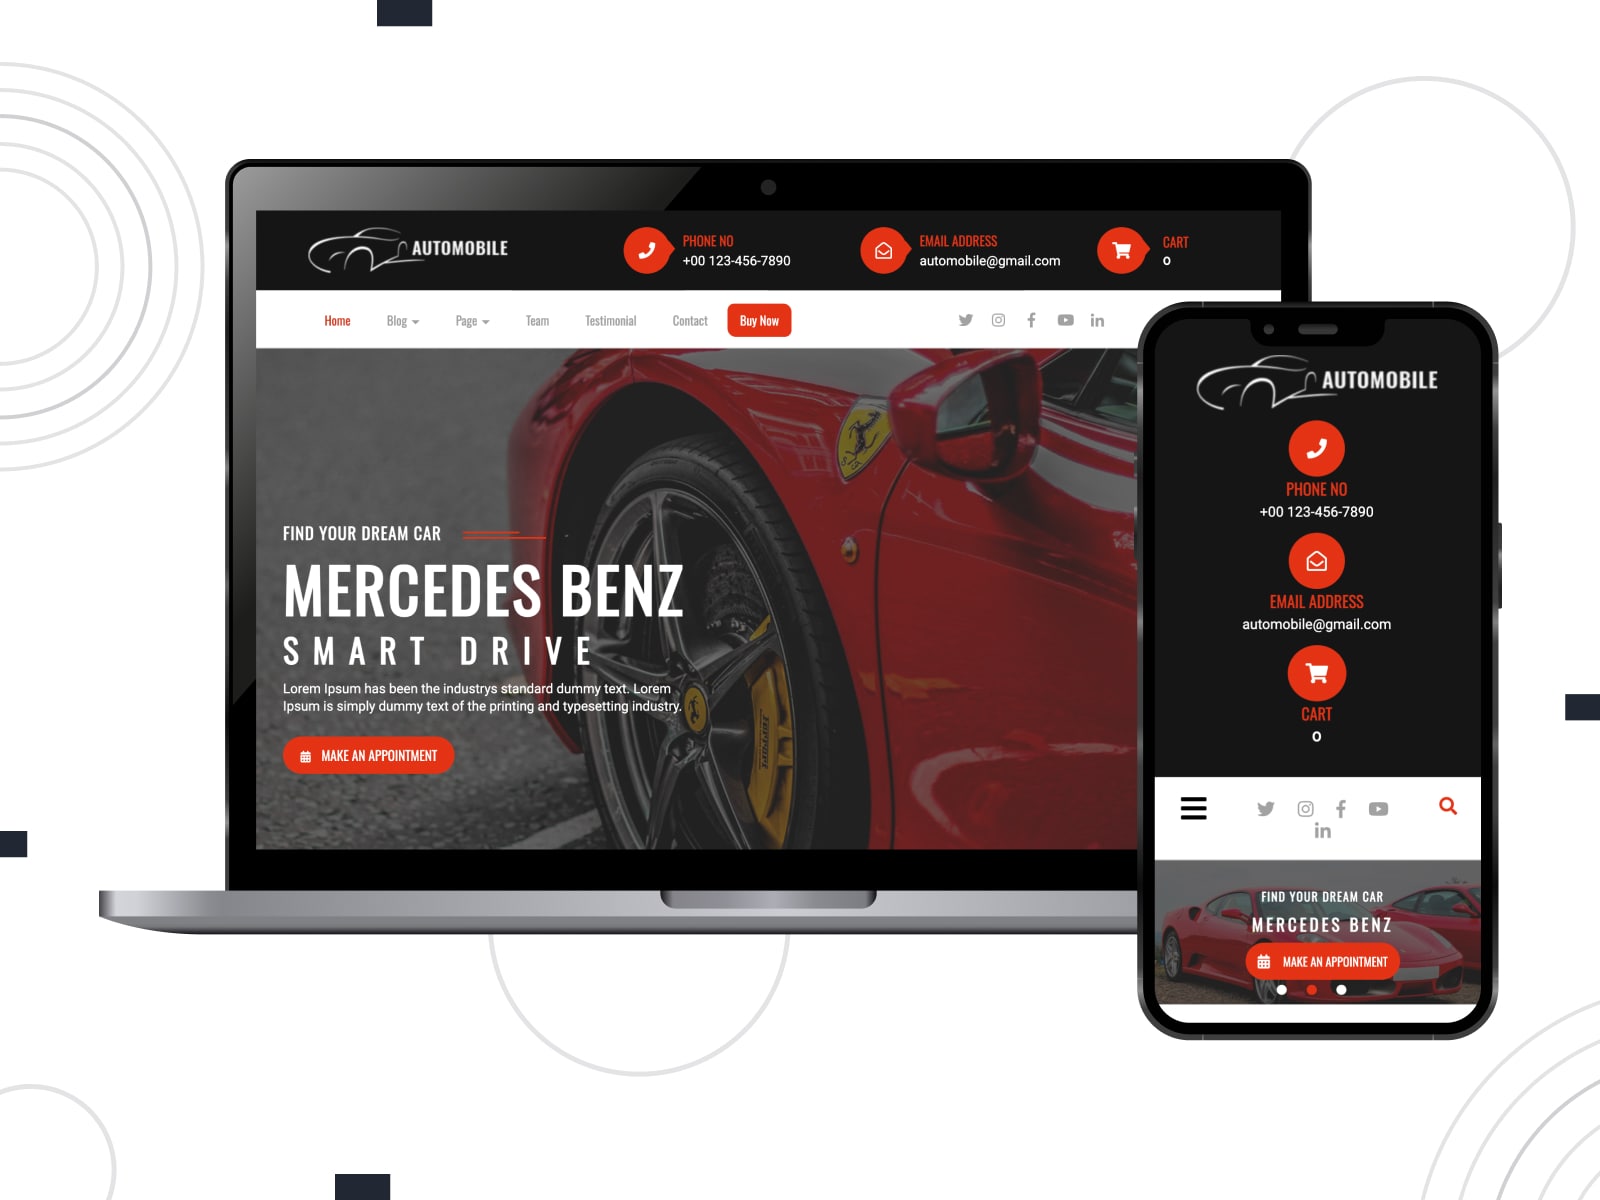 Collage of the Automobile Hub free WordPress theme demo page in red, black and white colors.